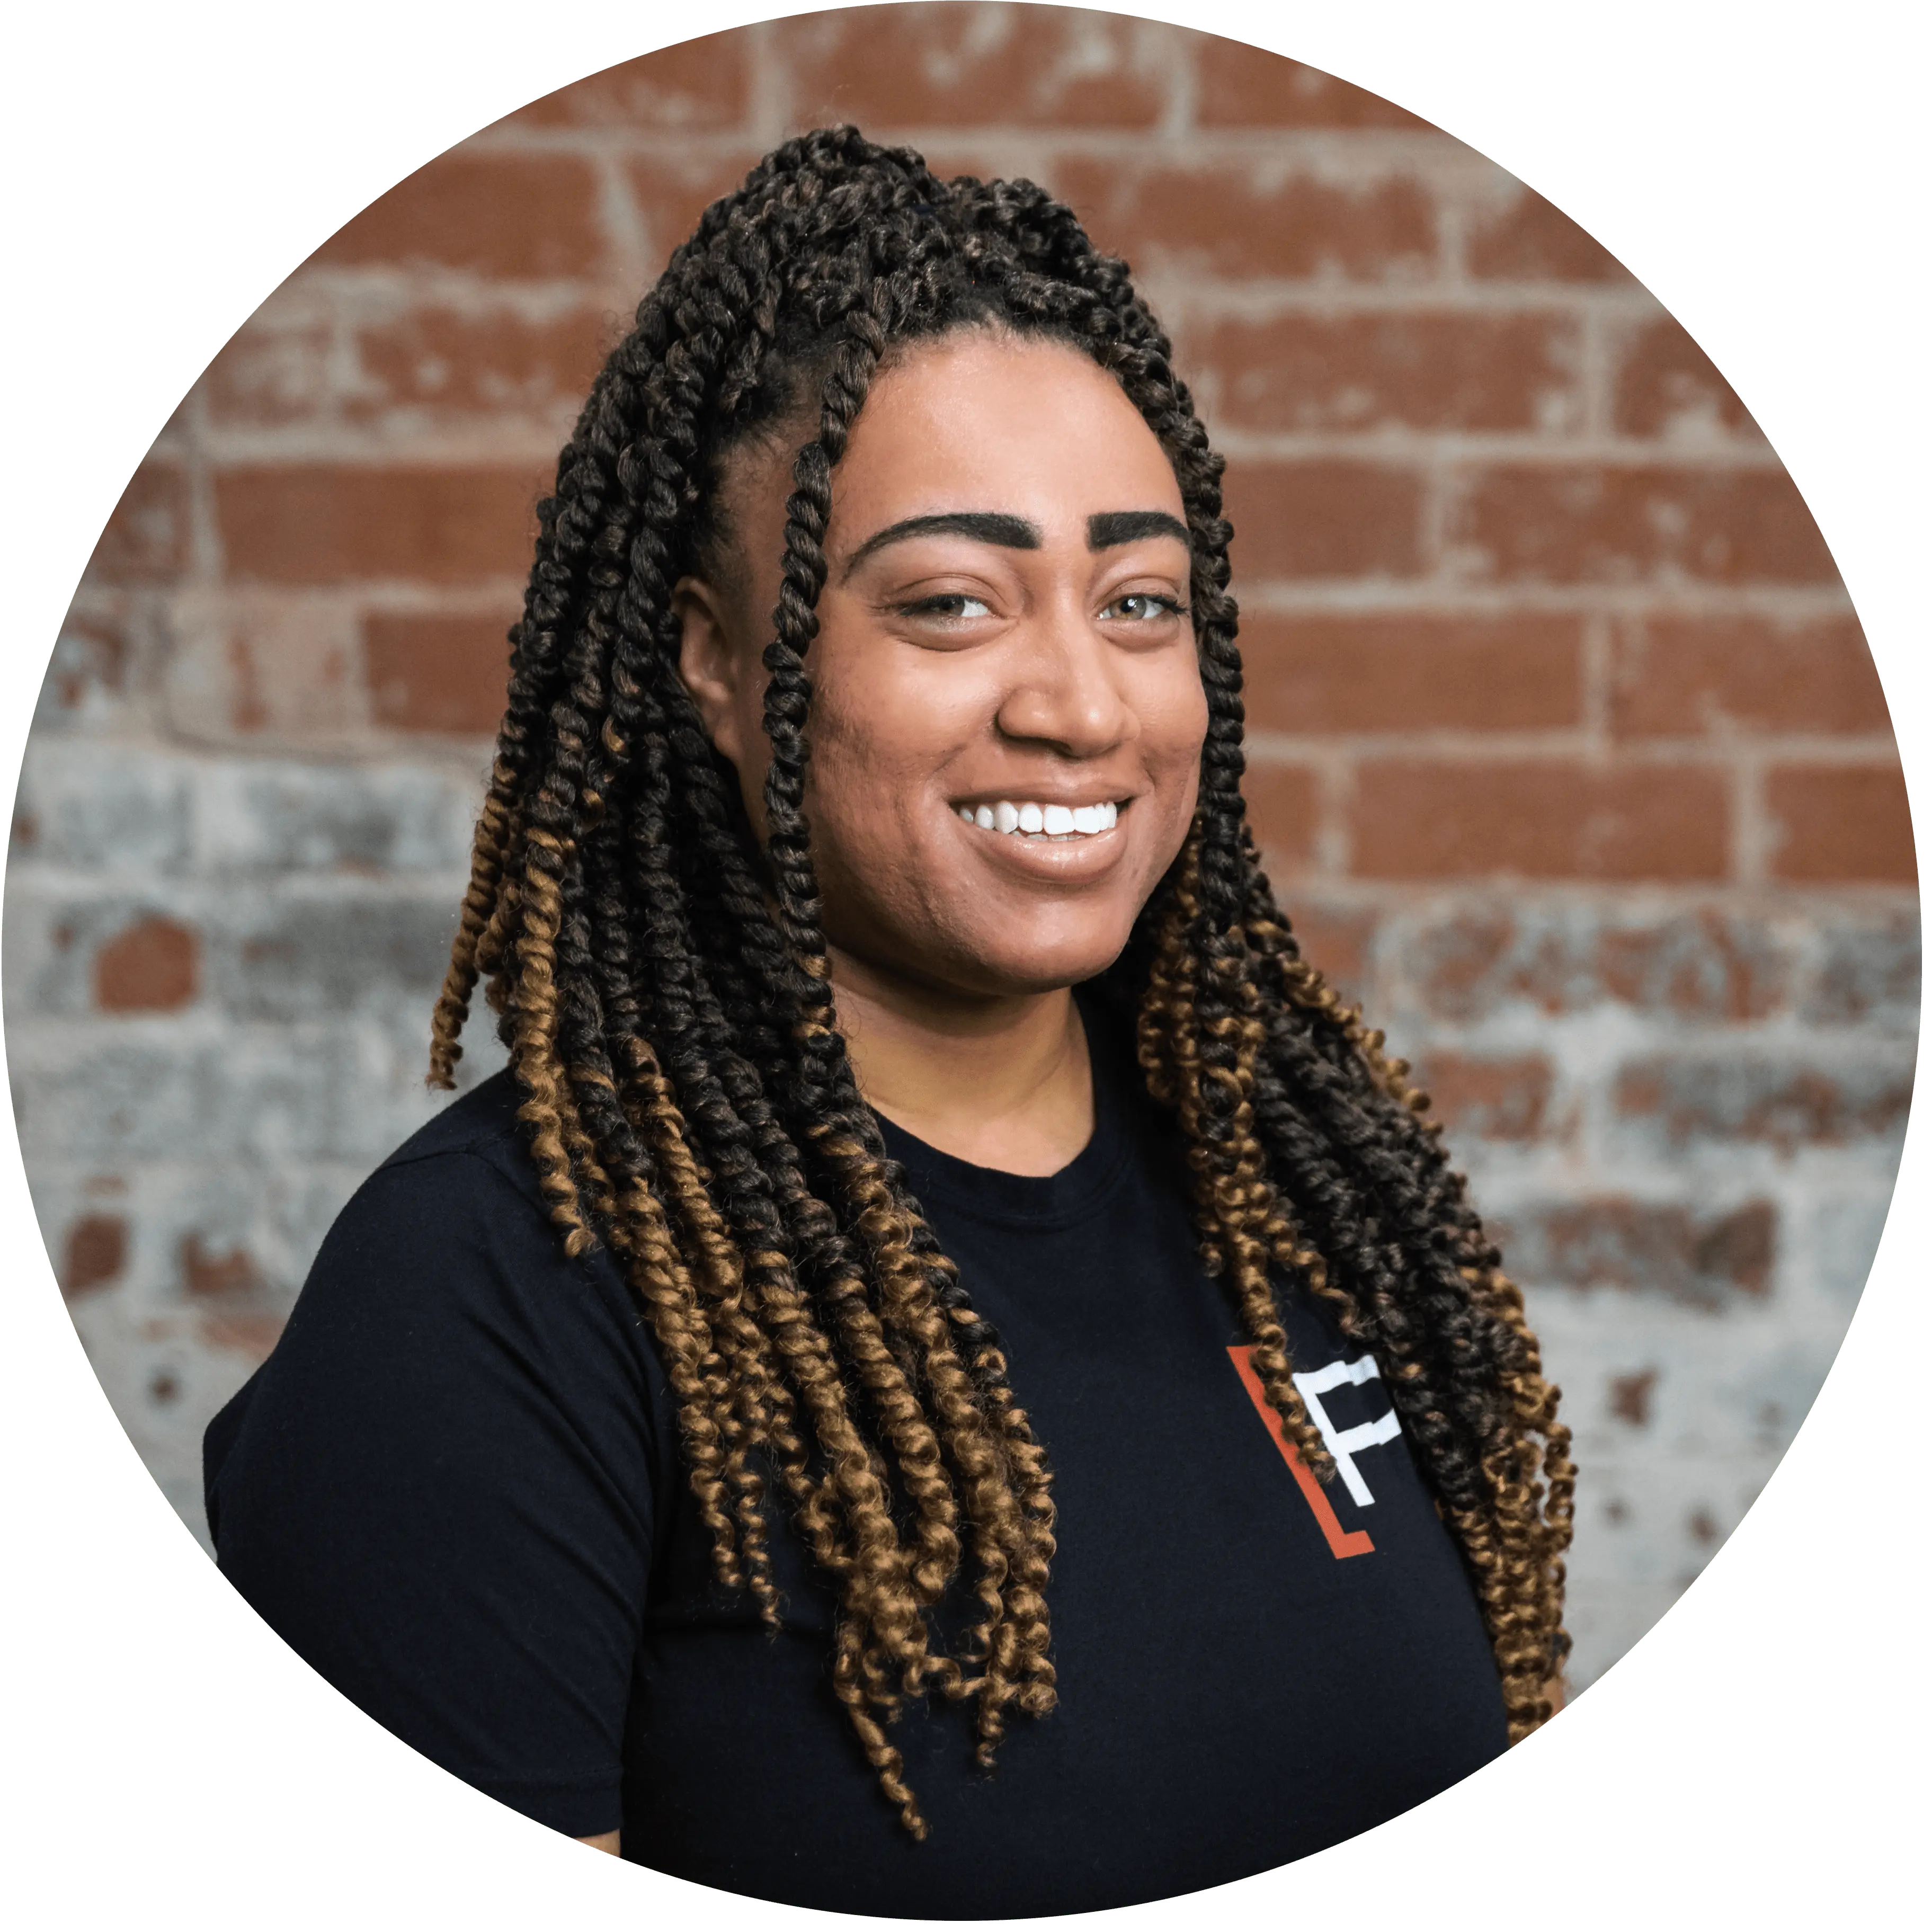 Vanessa Rowe, Office Manager at Prehab Physical Therapy.